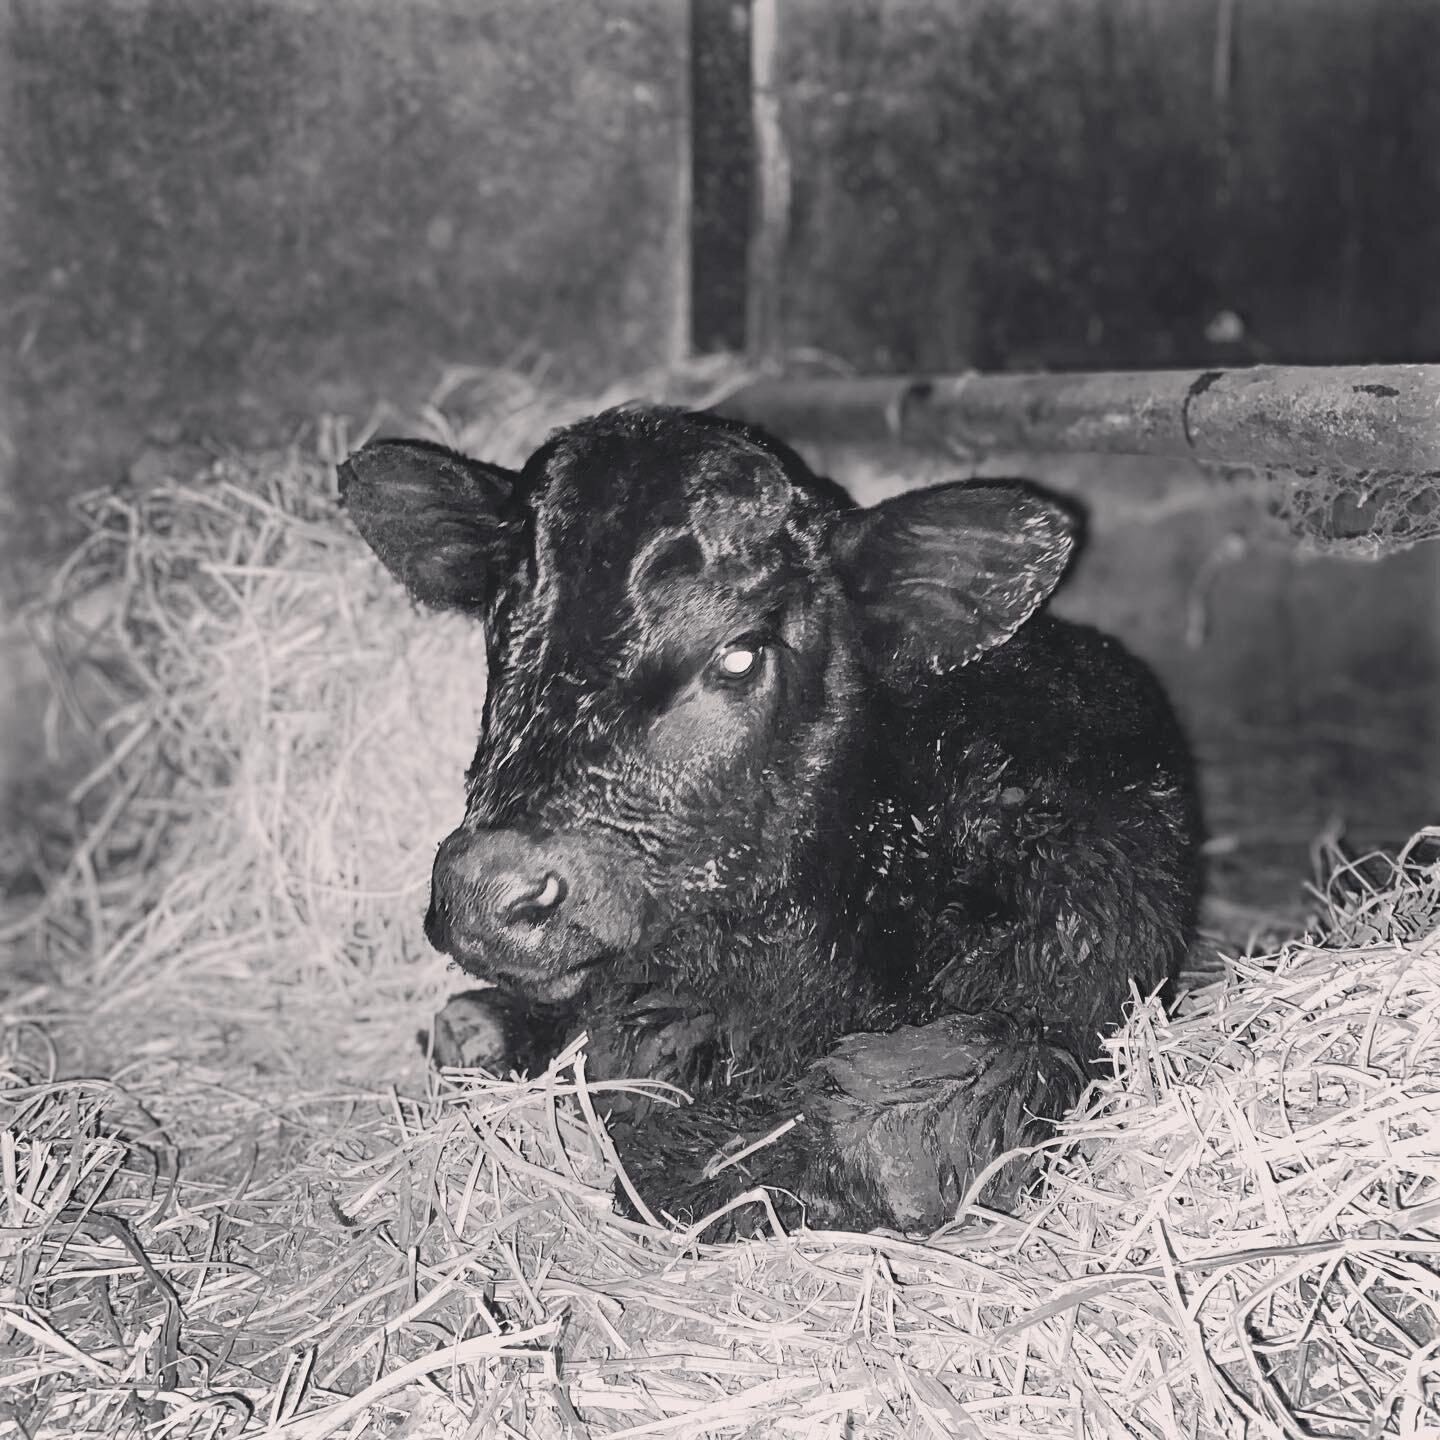 It&rsquo;s begun!

Over the weekend when we lost power, I walked the calving barn and kindly asked the ladies to please hold off on having their babies until the snow melted and the power came back. It&rsquo;s dangerous when calves are born into wet,